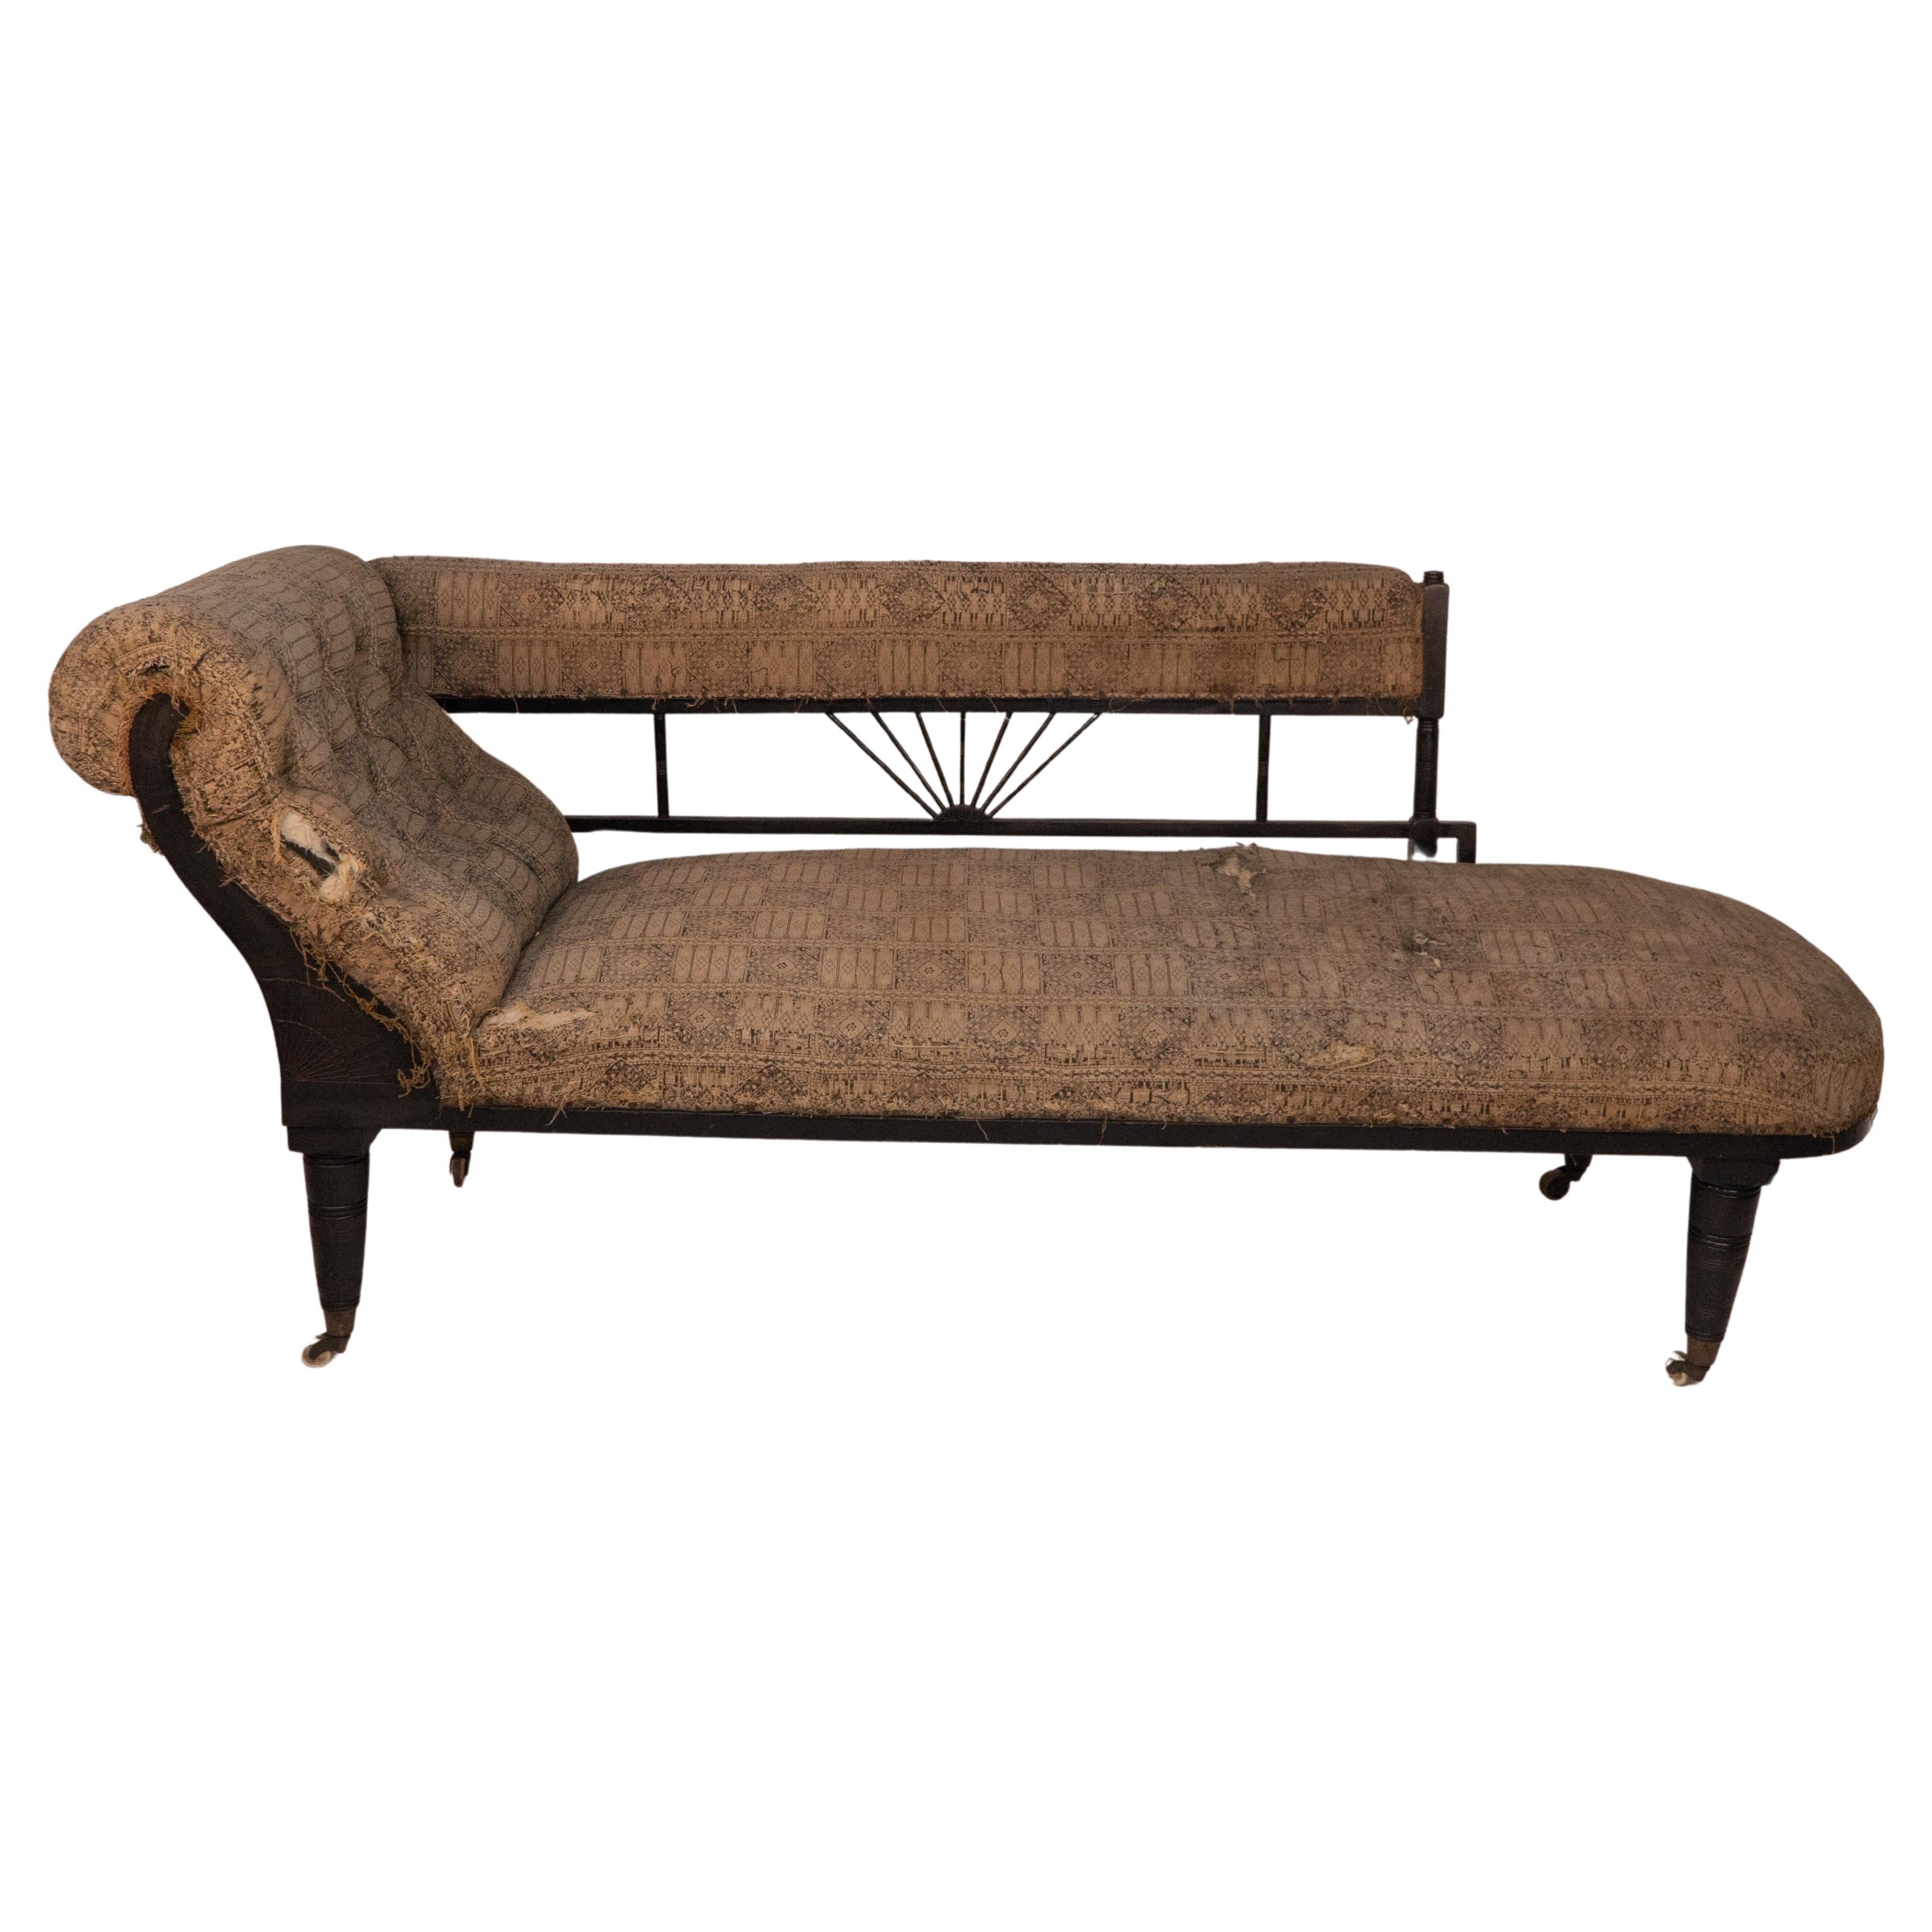 H W Batley (attributed). An Anglo-Japanese ebonized chaise lounge or day bed